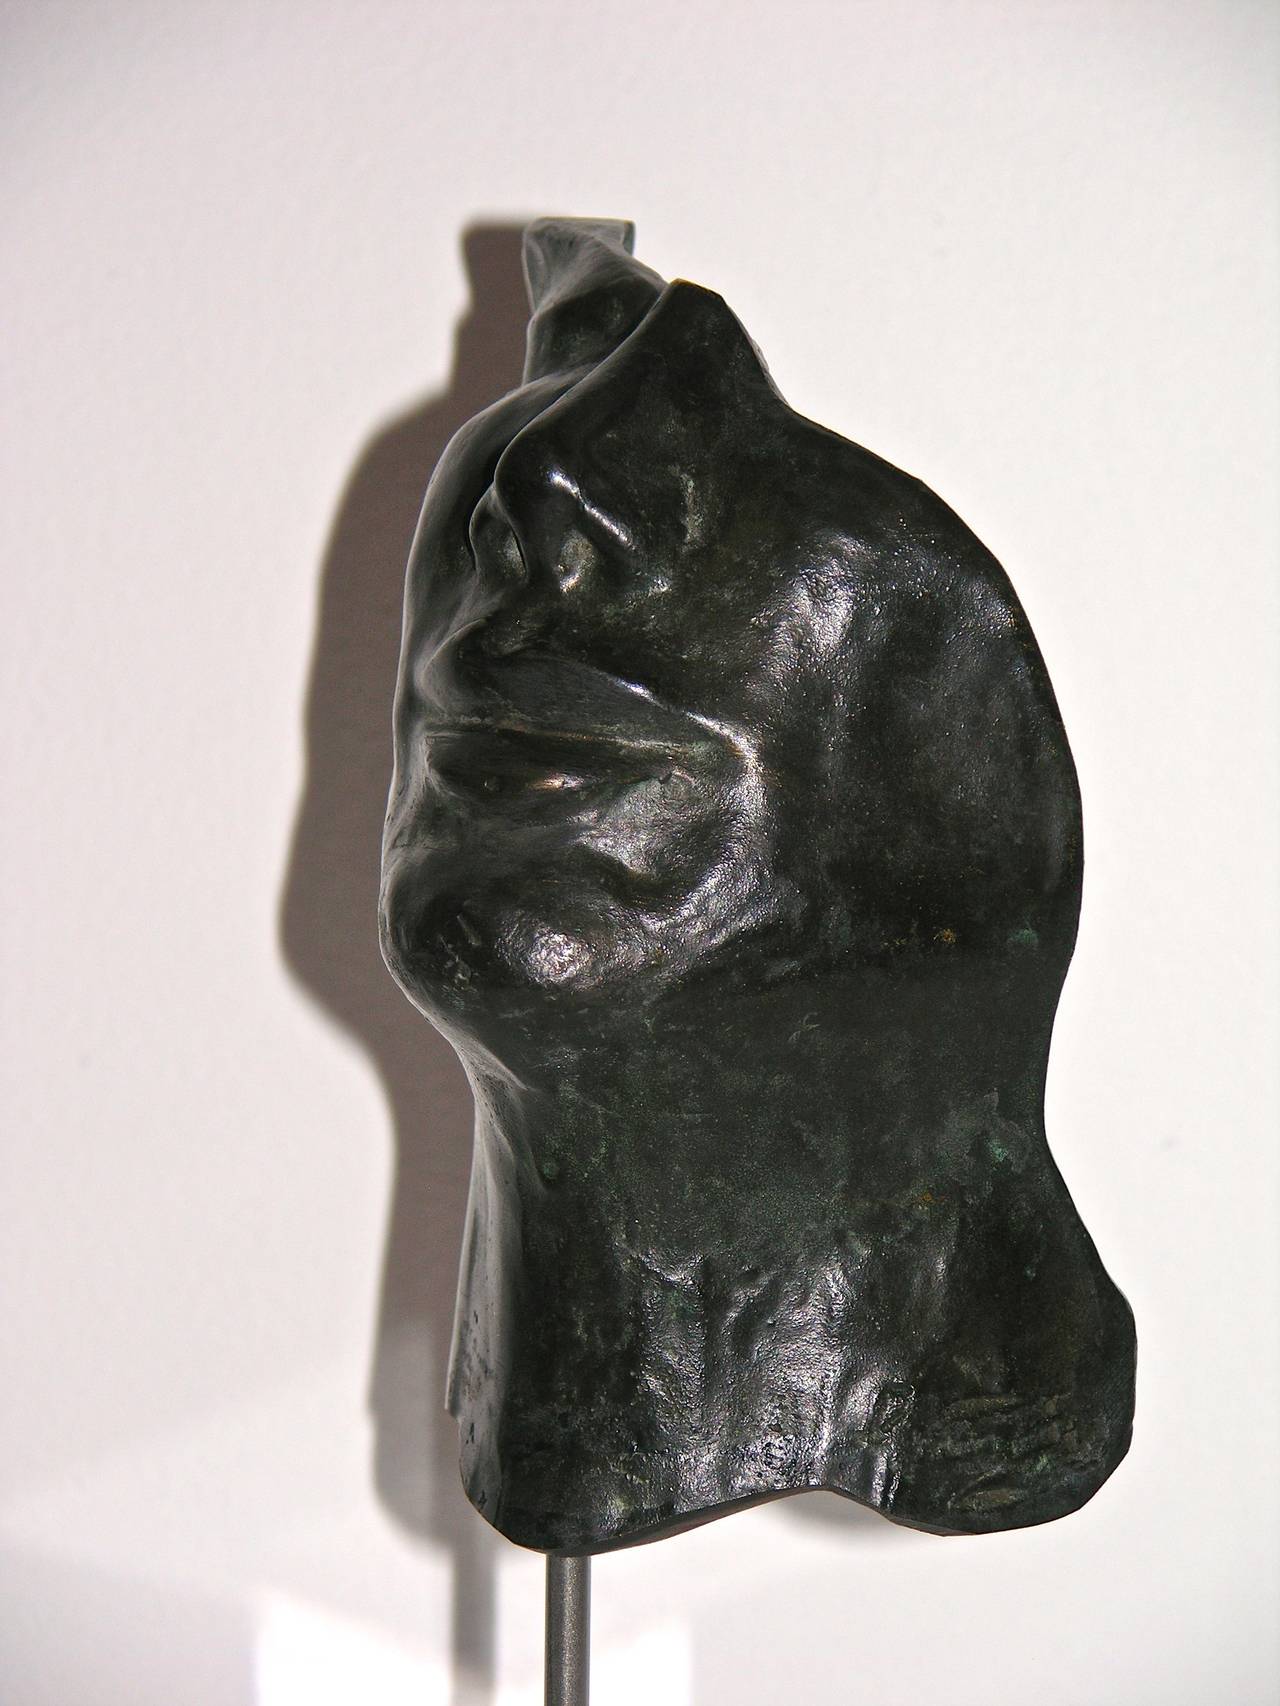 Hand-Crafted Hollow Face, Italian Black Bronze Sculpture on Lucite Base by Ginestroni